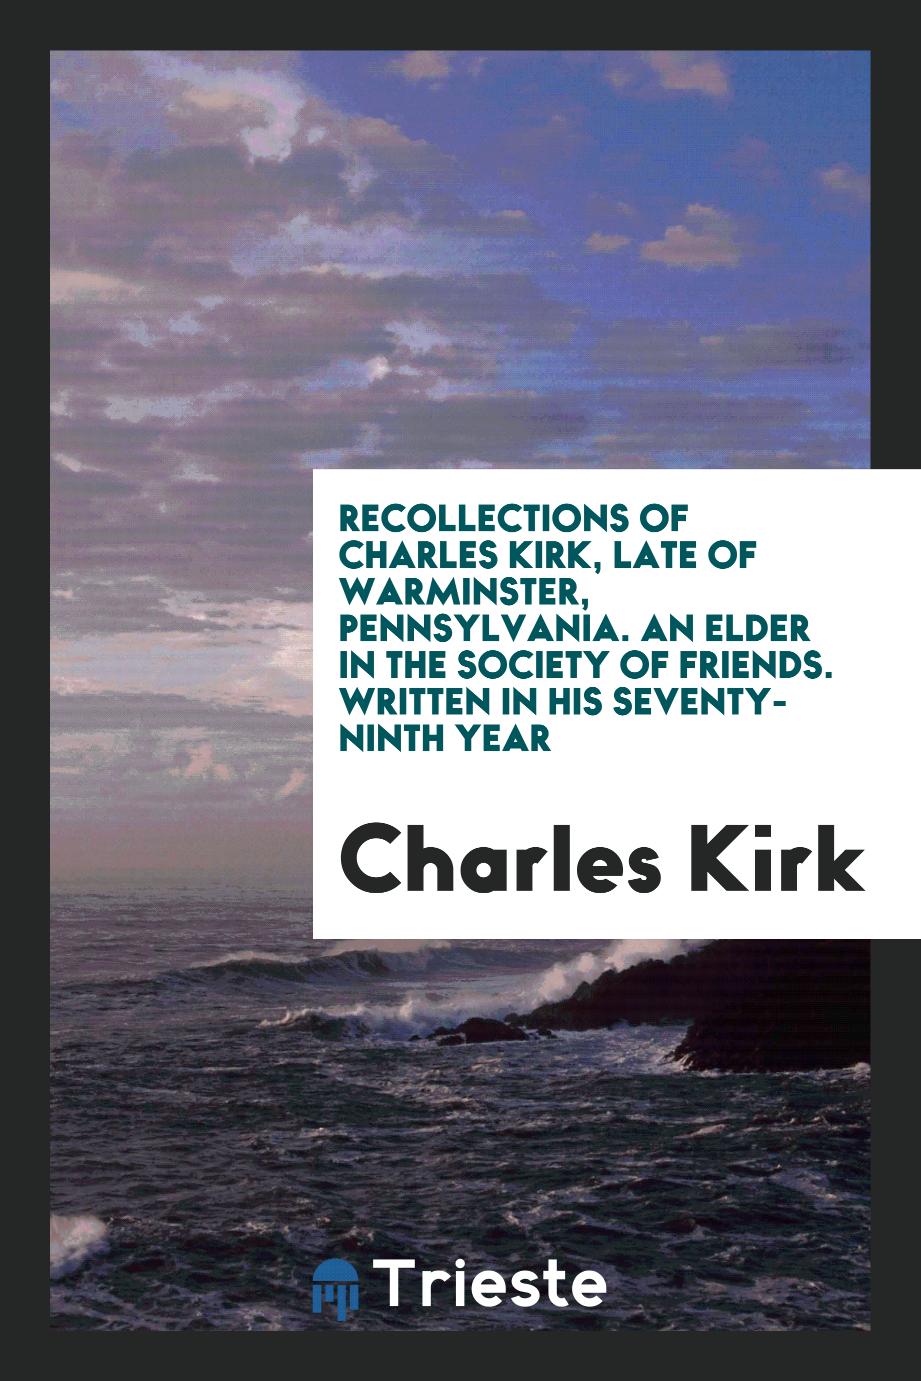 Recollections of Charles Kirk, Late of Warminster, Pennsylvania. An Elder in the Society of Friends. Written in his Seventy-ninth Year